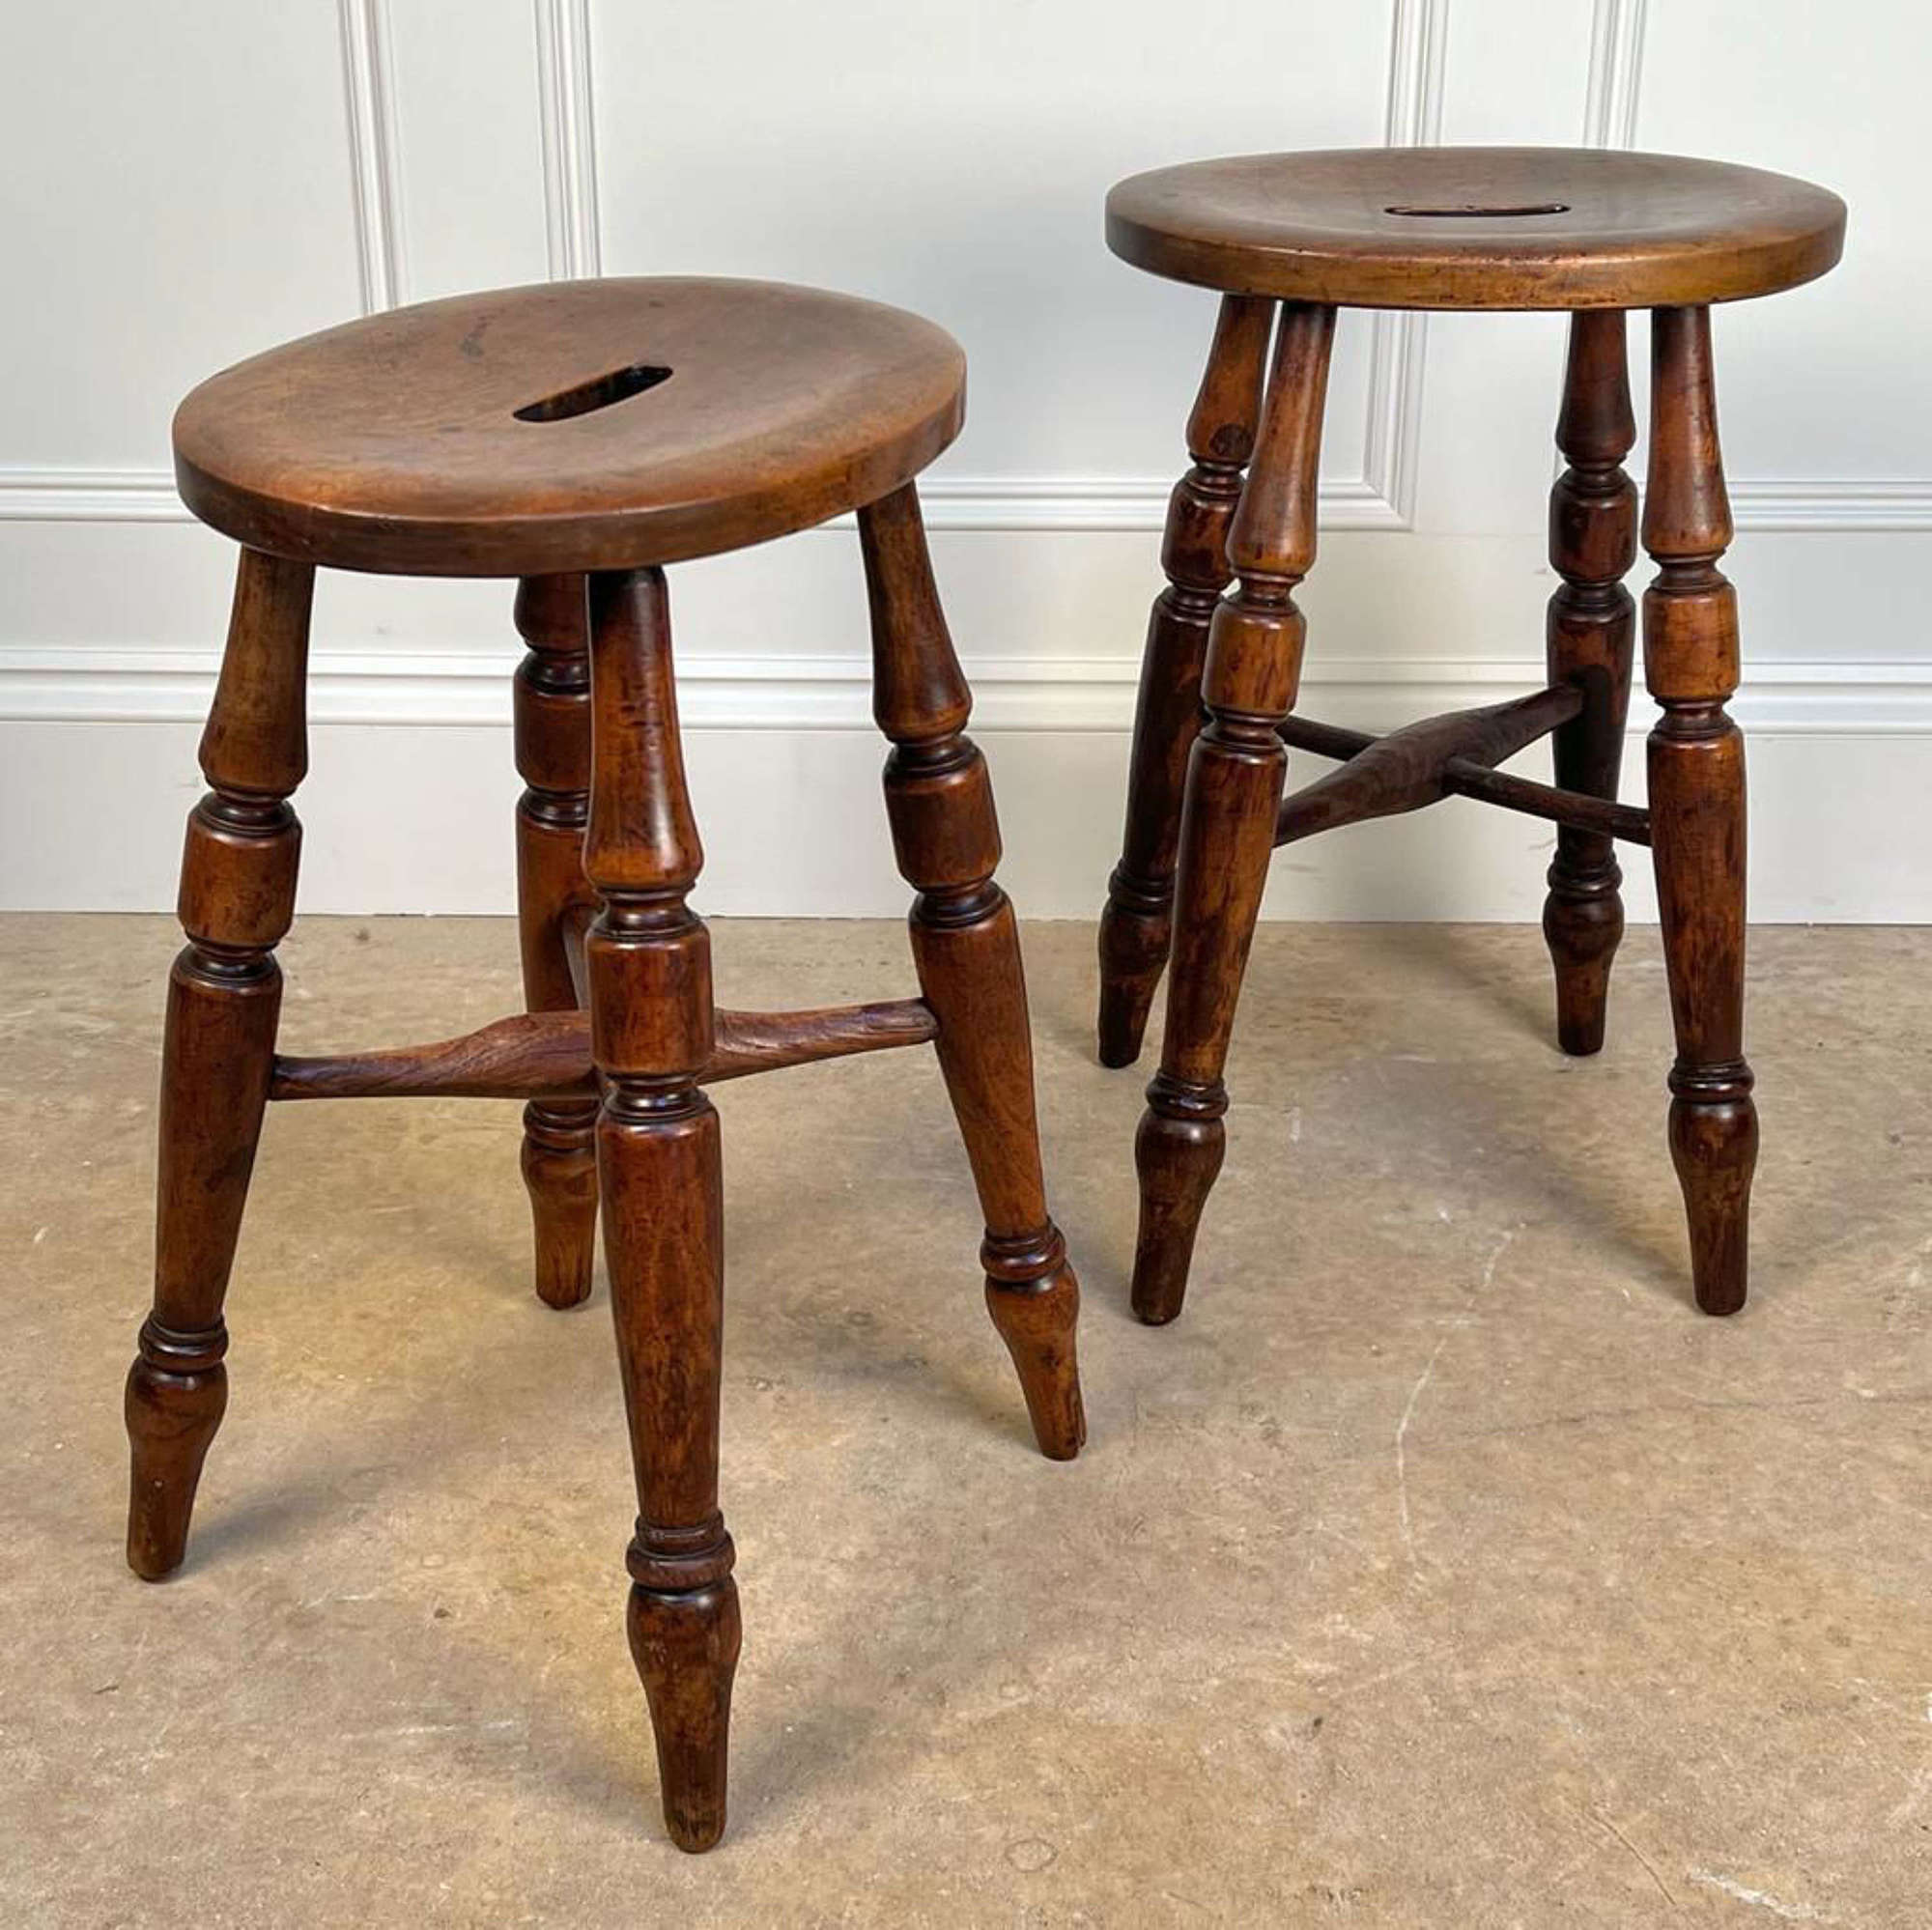 A Pair of 19th C Fruitwood Country Stools